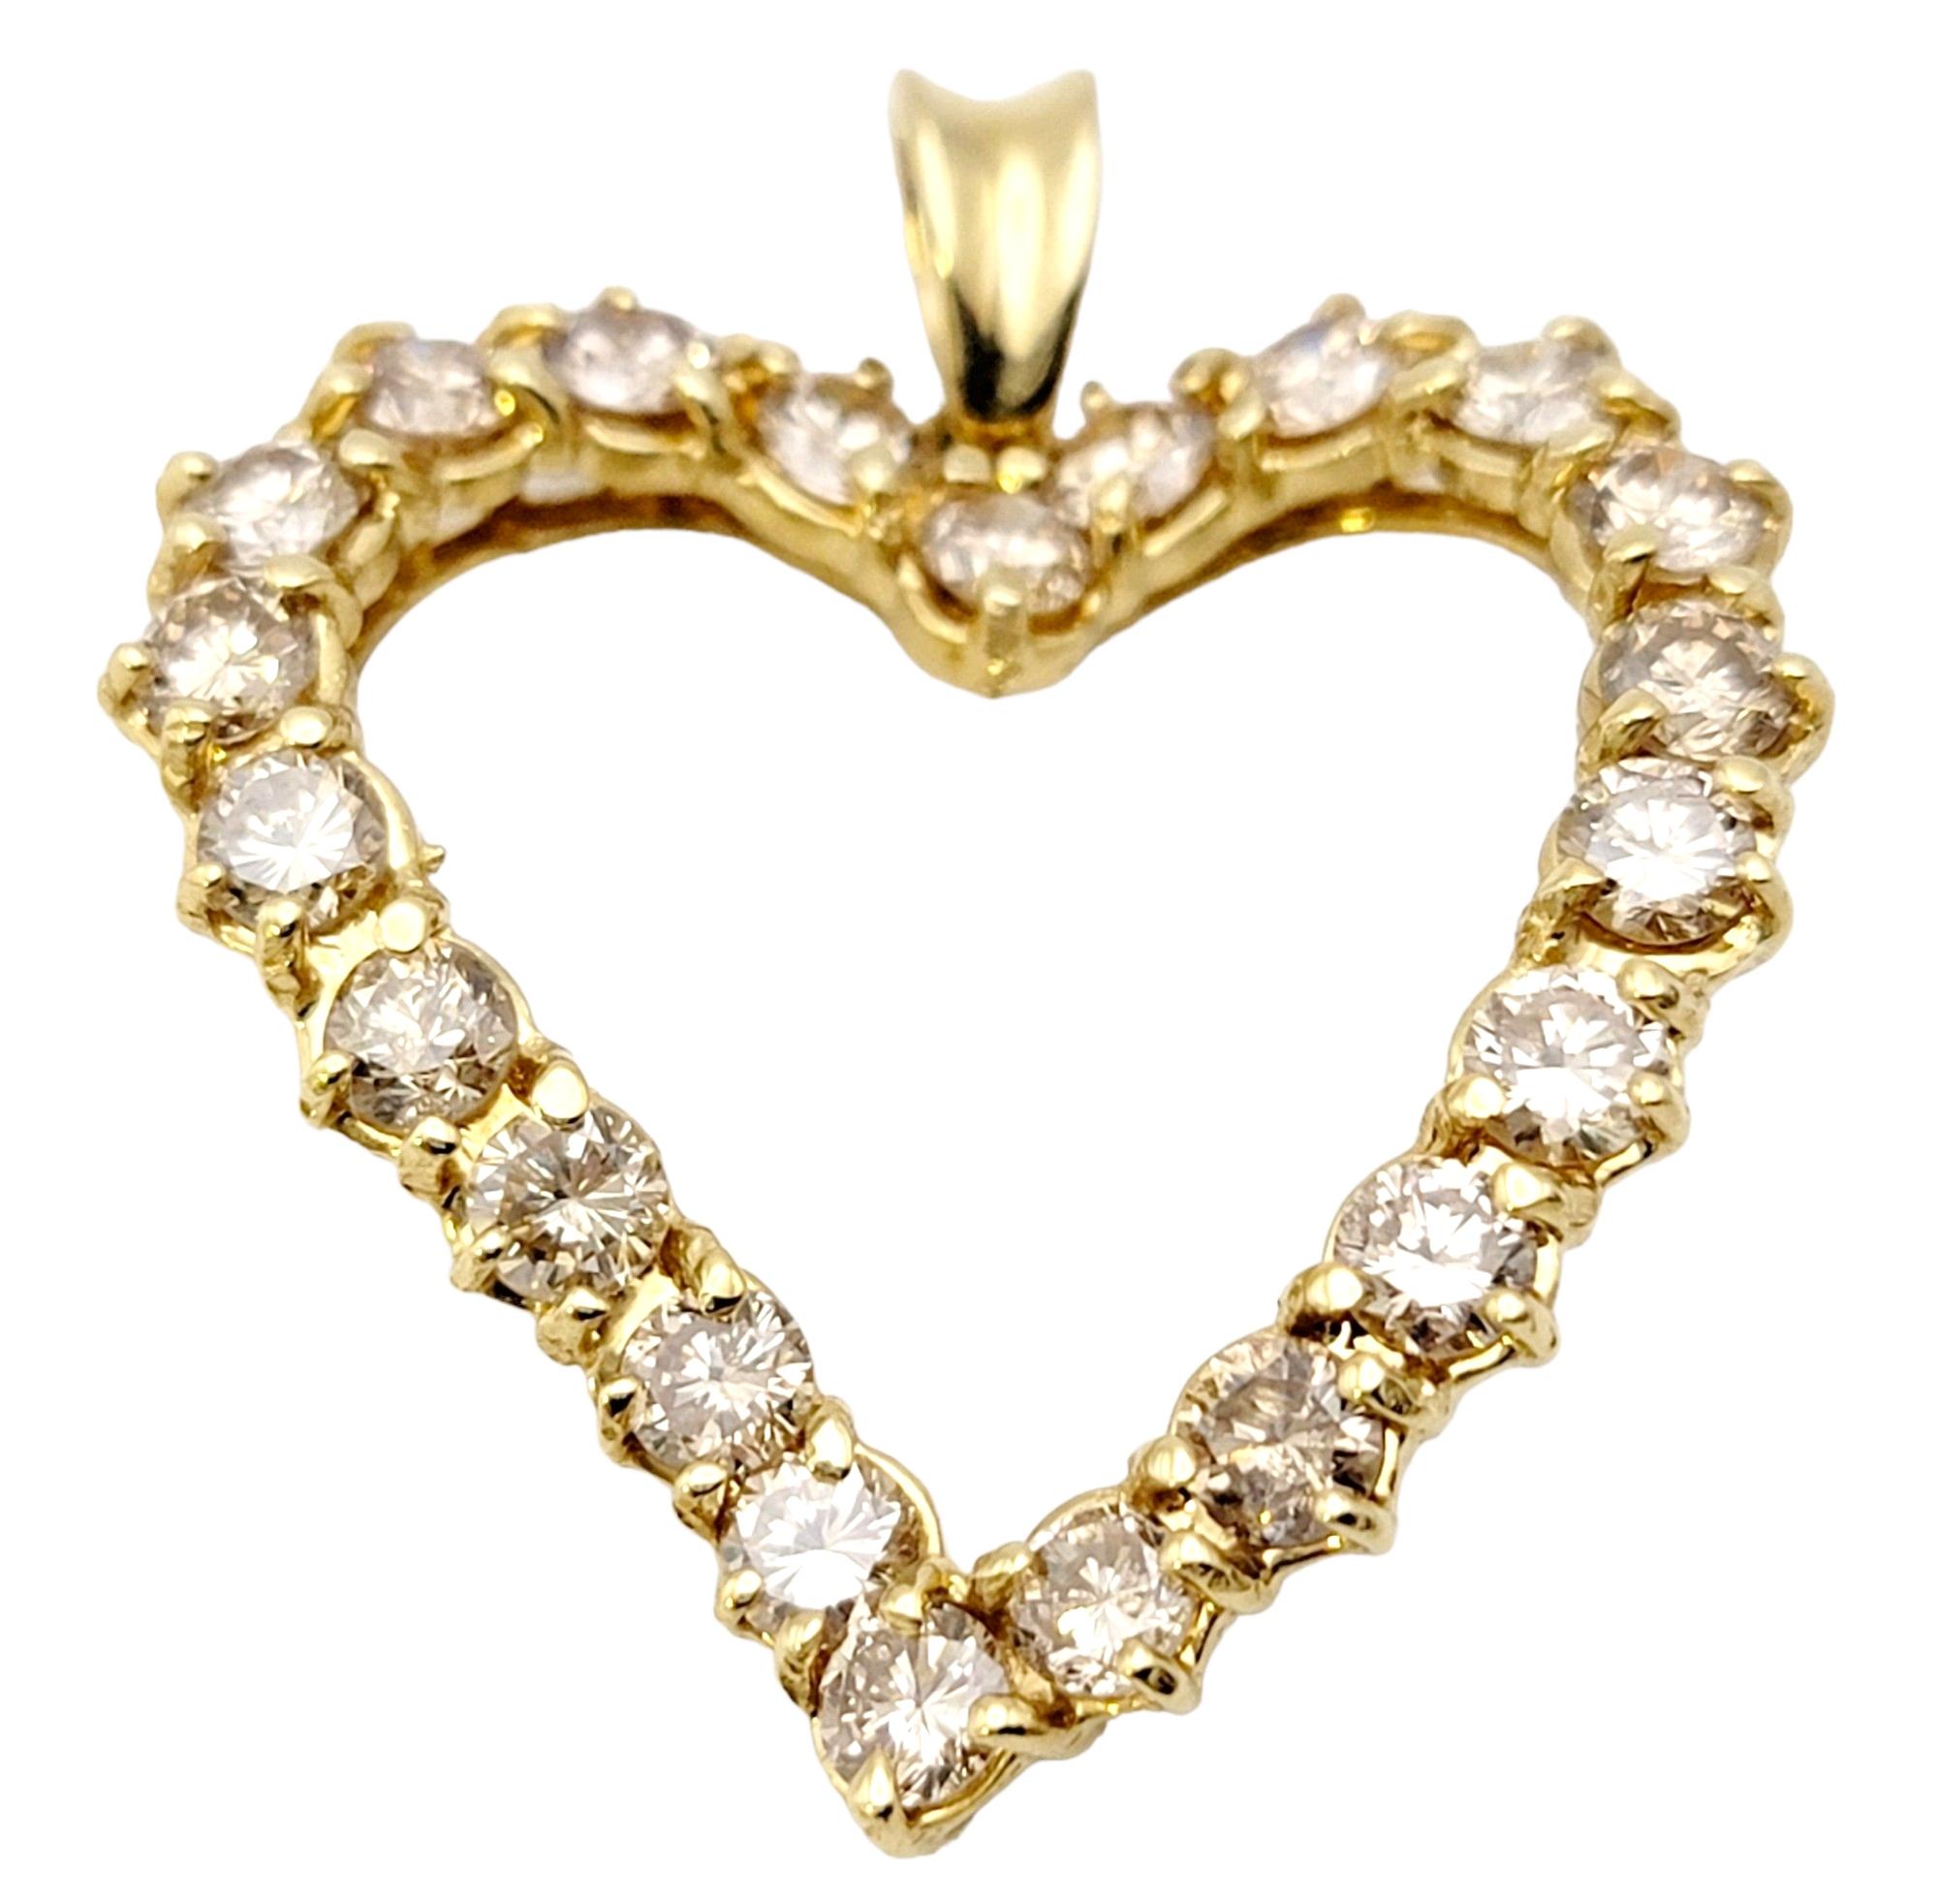 Shown here is a breathtaking champagne diamond pendant, sparkling beautifully from all angles, while radiating elegance and grace. This enchanting pendant captures the essence of love and beauty, making it a perfect symbol of affection. 

Crafted